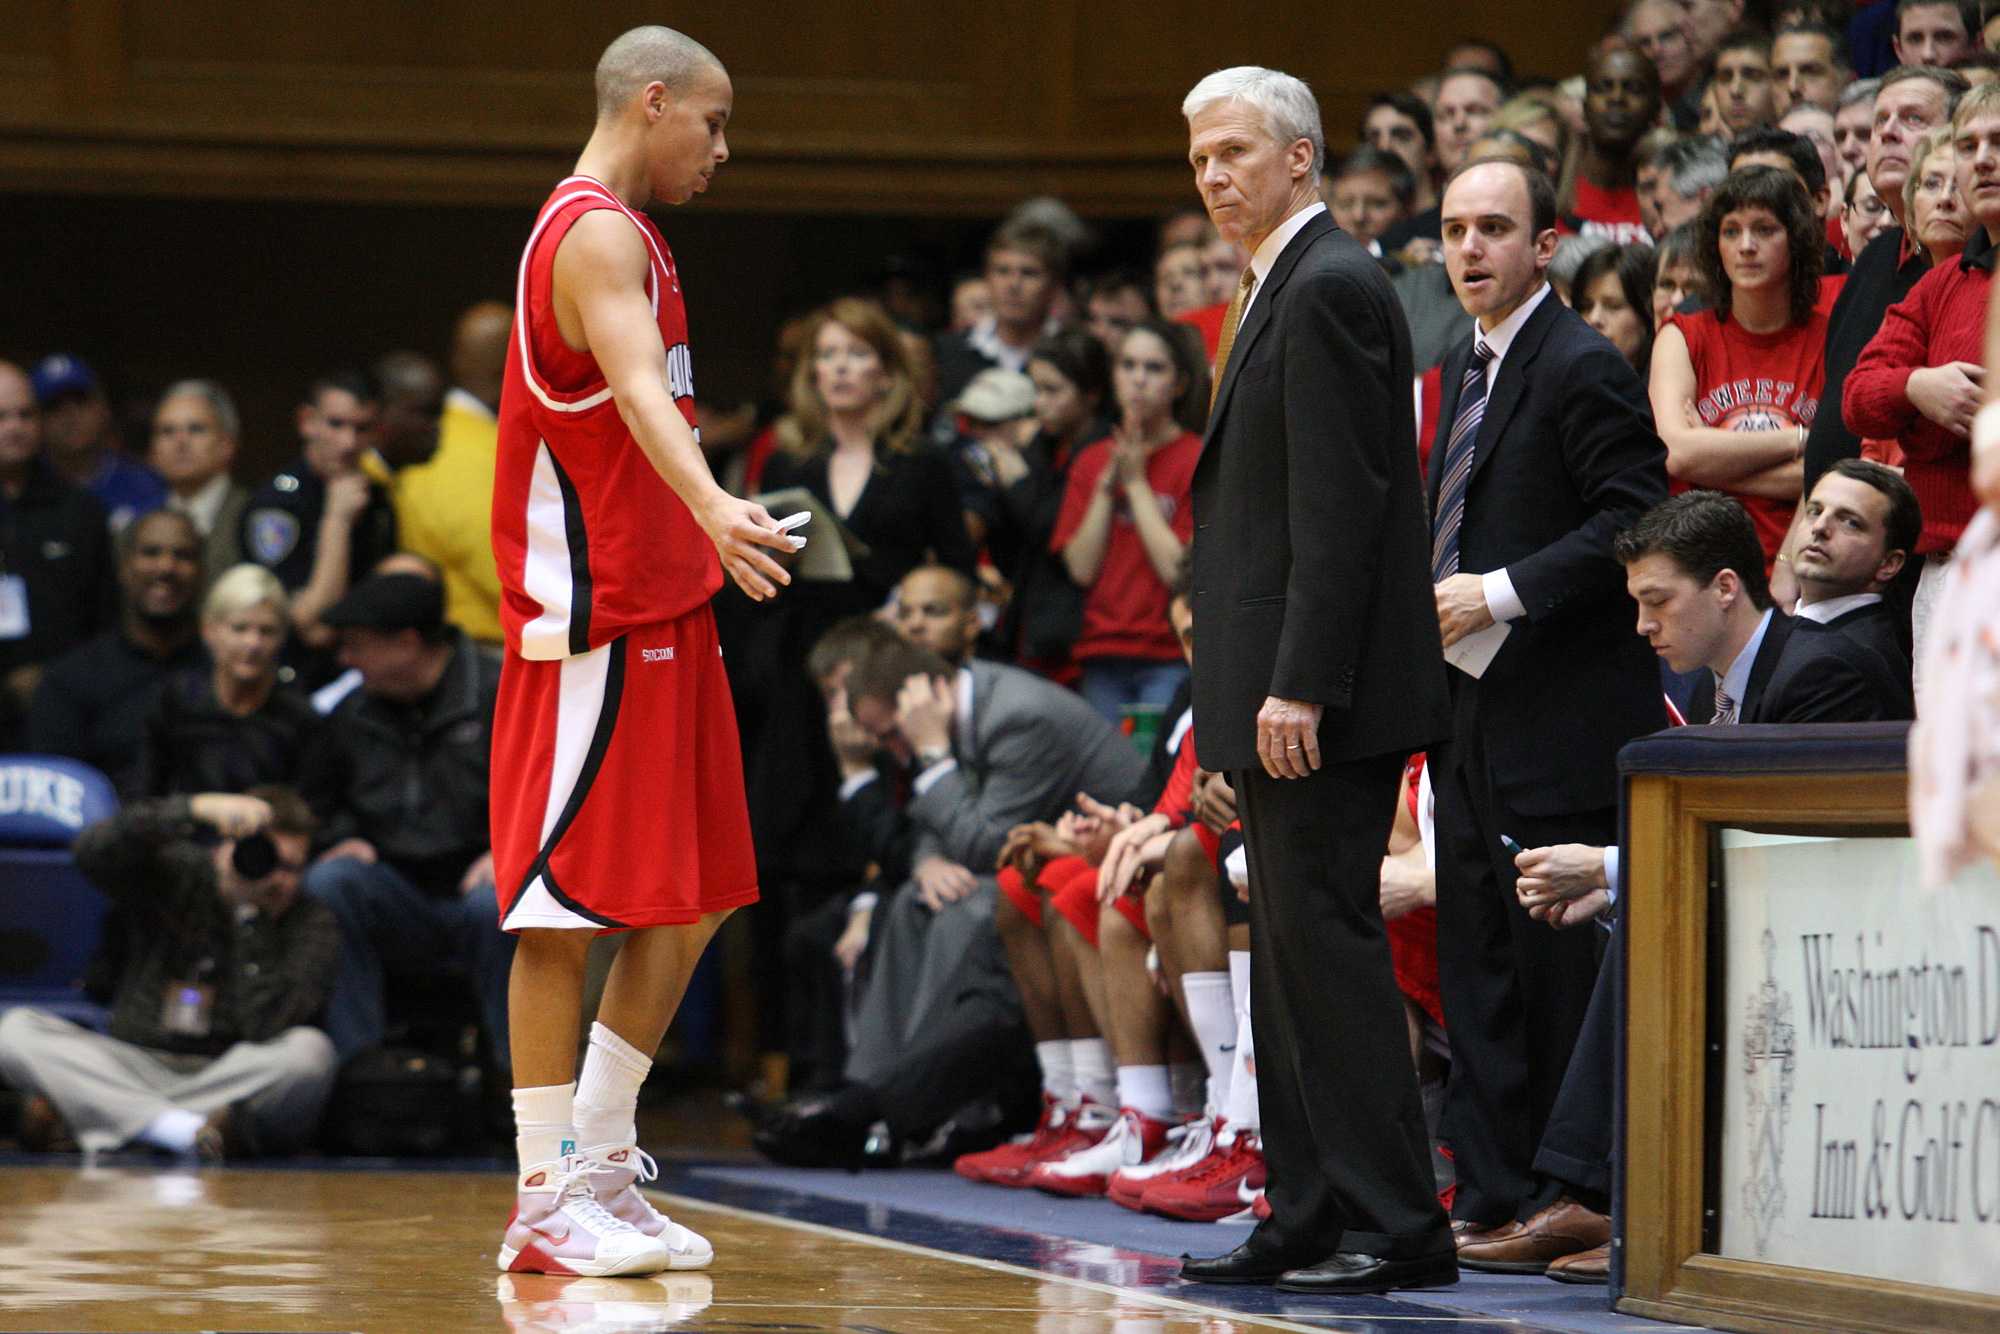 Jim Fox, standing on right, coached at Davidson for 13 years including an elite NCAA tournament run in 2008 with current NBA MVP Stephen Curry, left, and Davidson Coach Bob McKillop, middle.